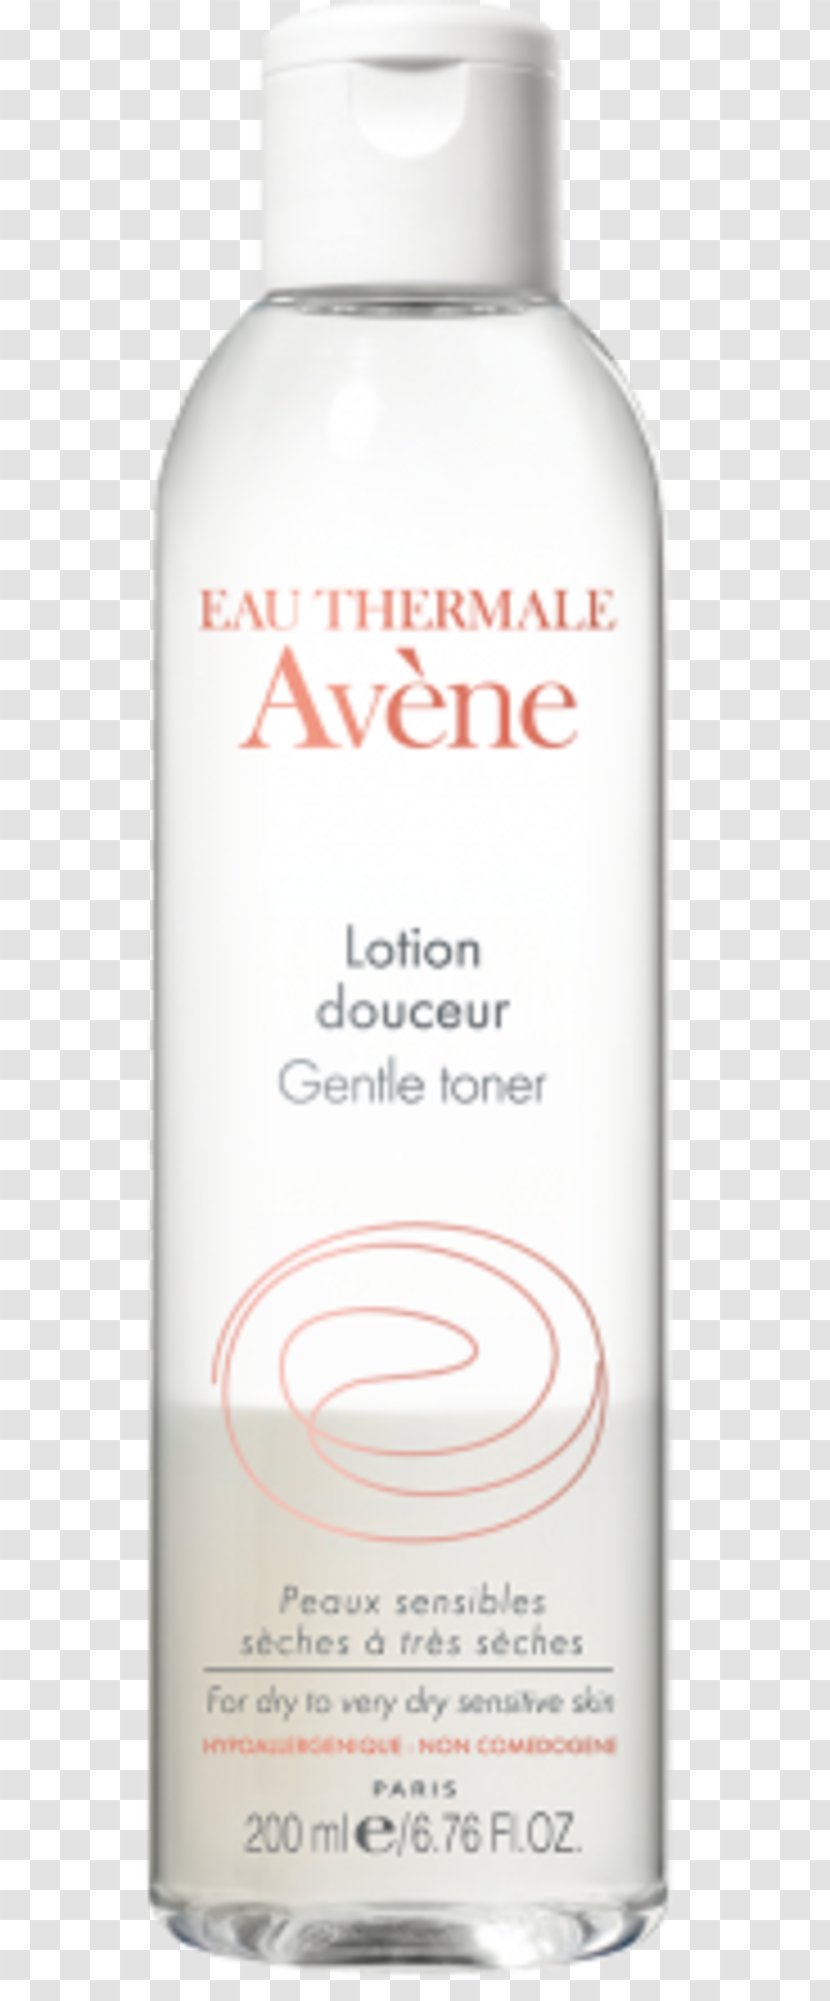 Avène Micellar Lotion Cleanser And Make-up Remover Toner Liquid - Micelle - 100 Percent Fresh Transparent PNG